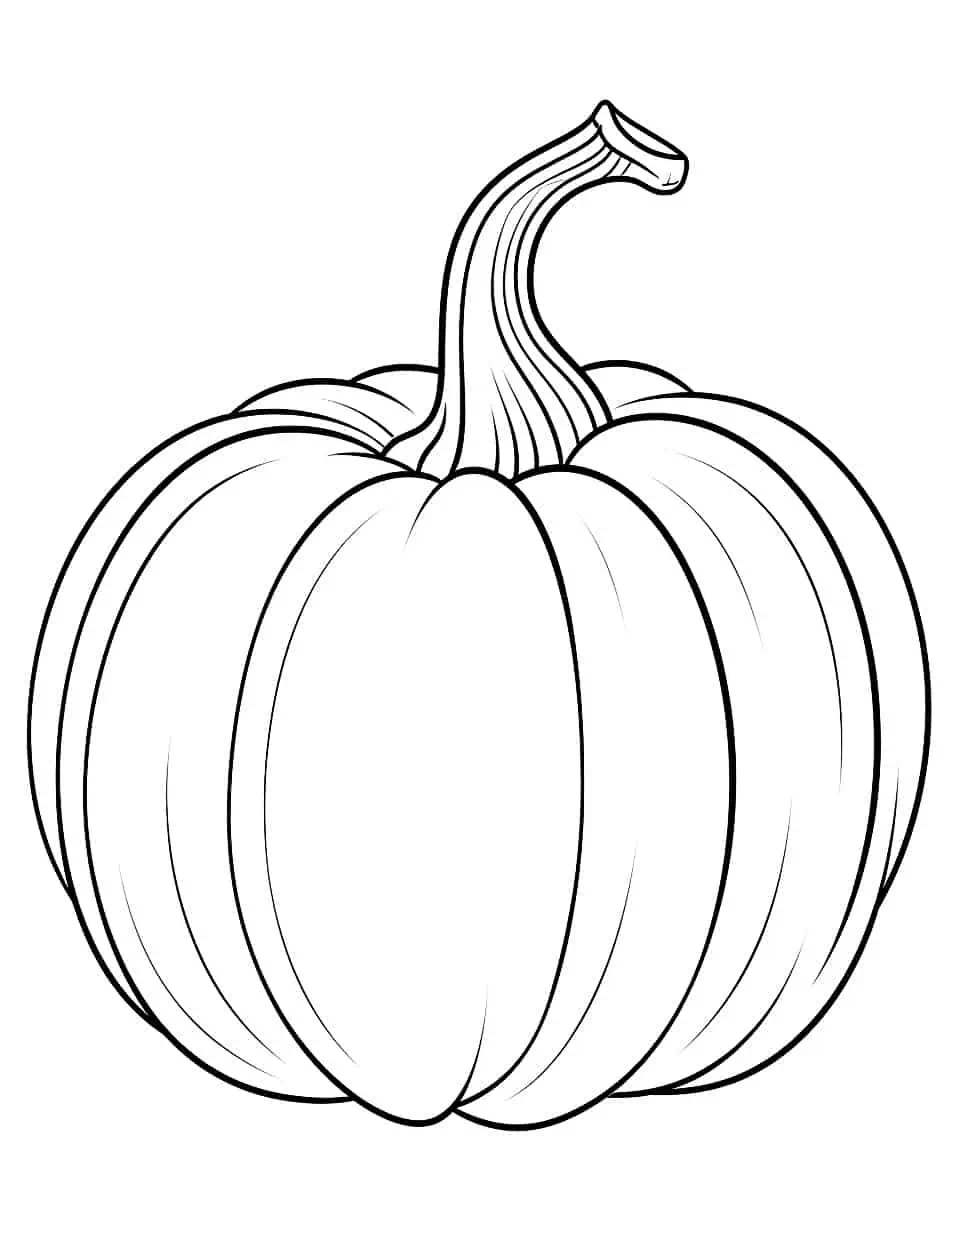 Blank Pumpkin Template Coloring Page - A blank pumpkin ready for any face or design the kids want to create.